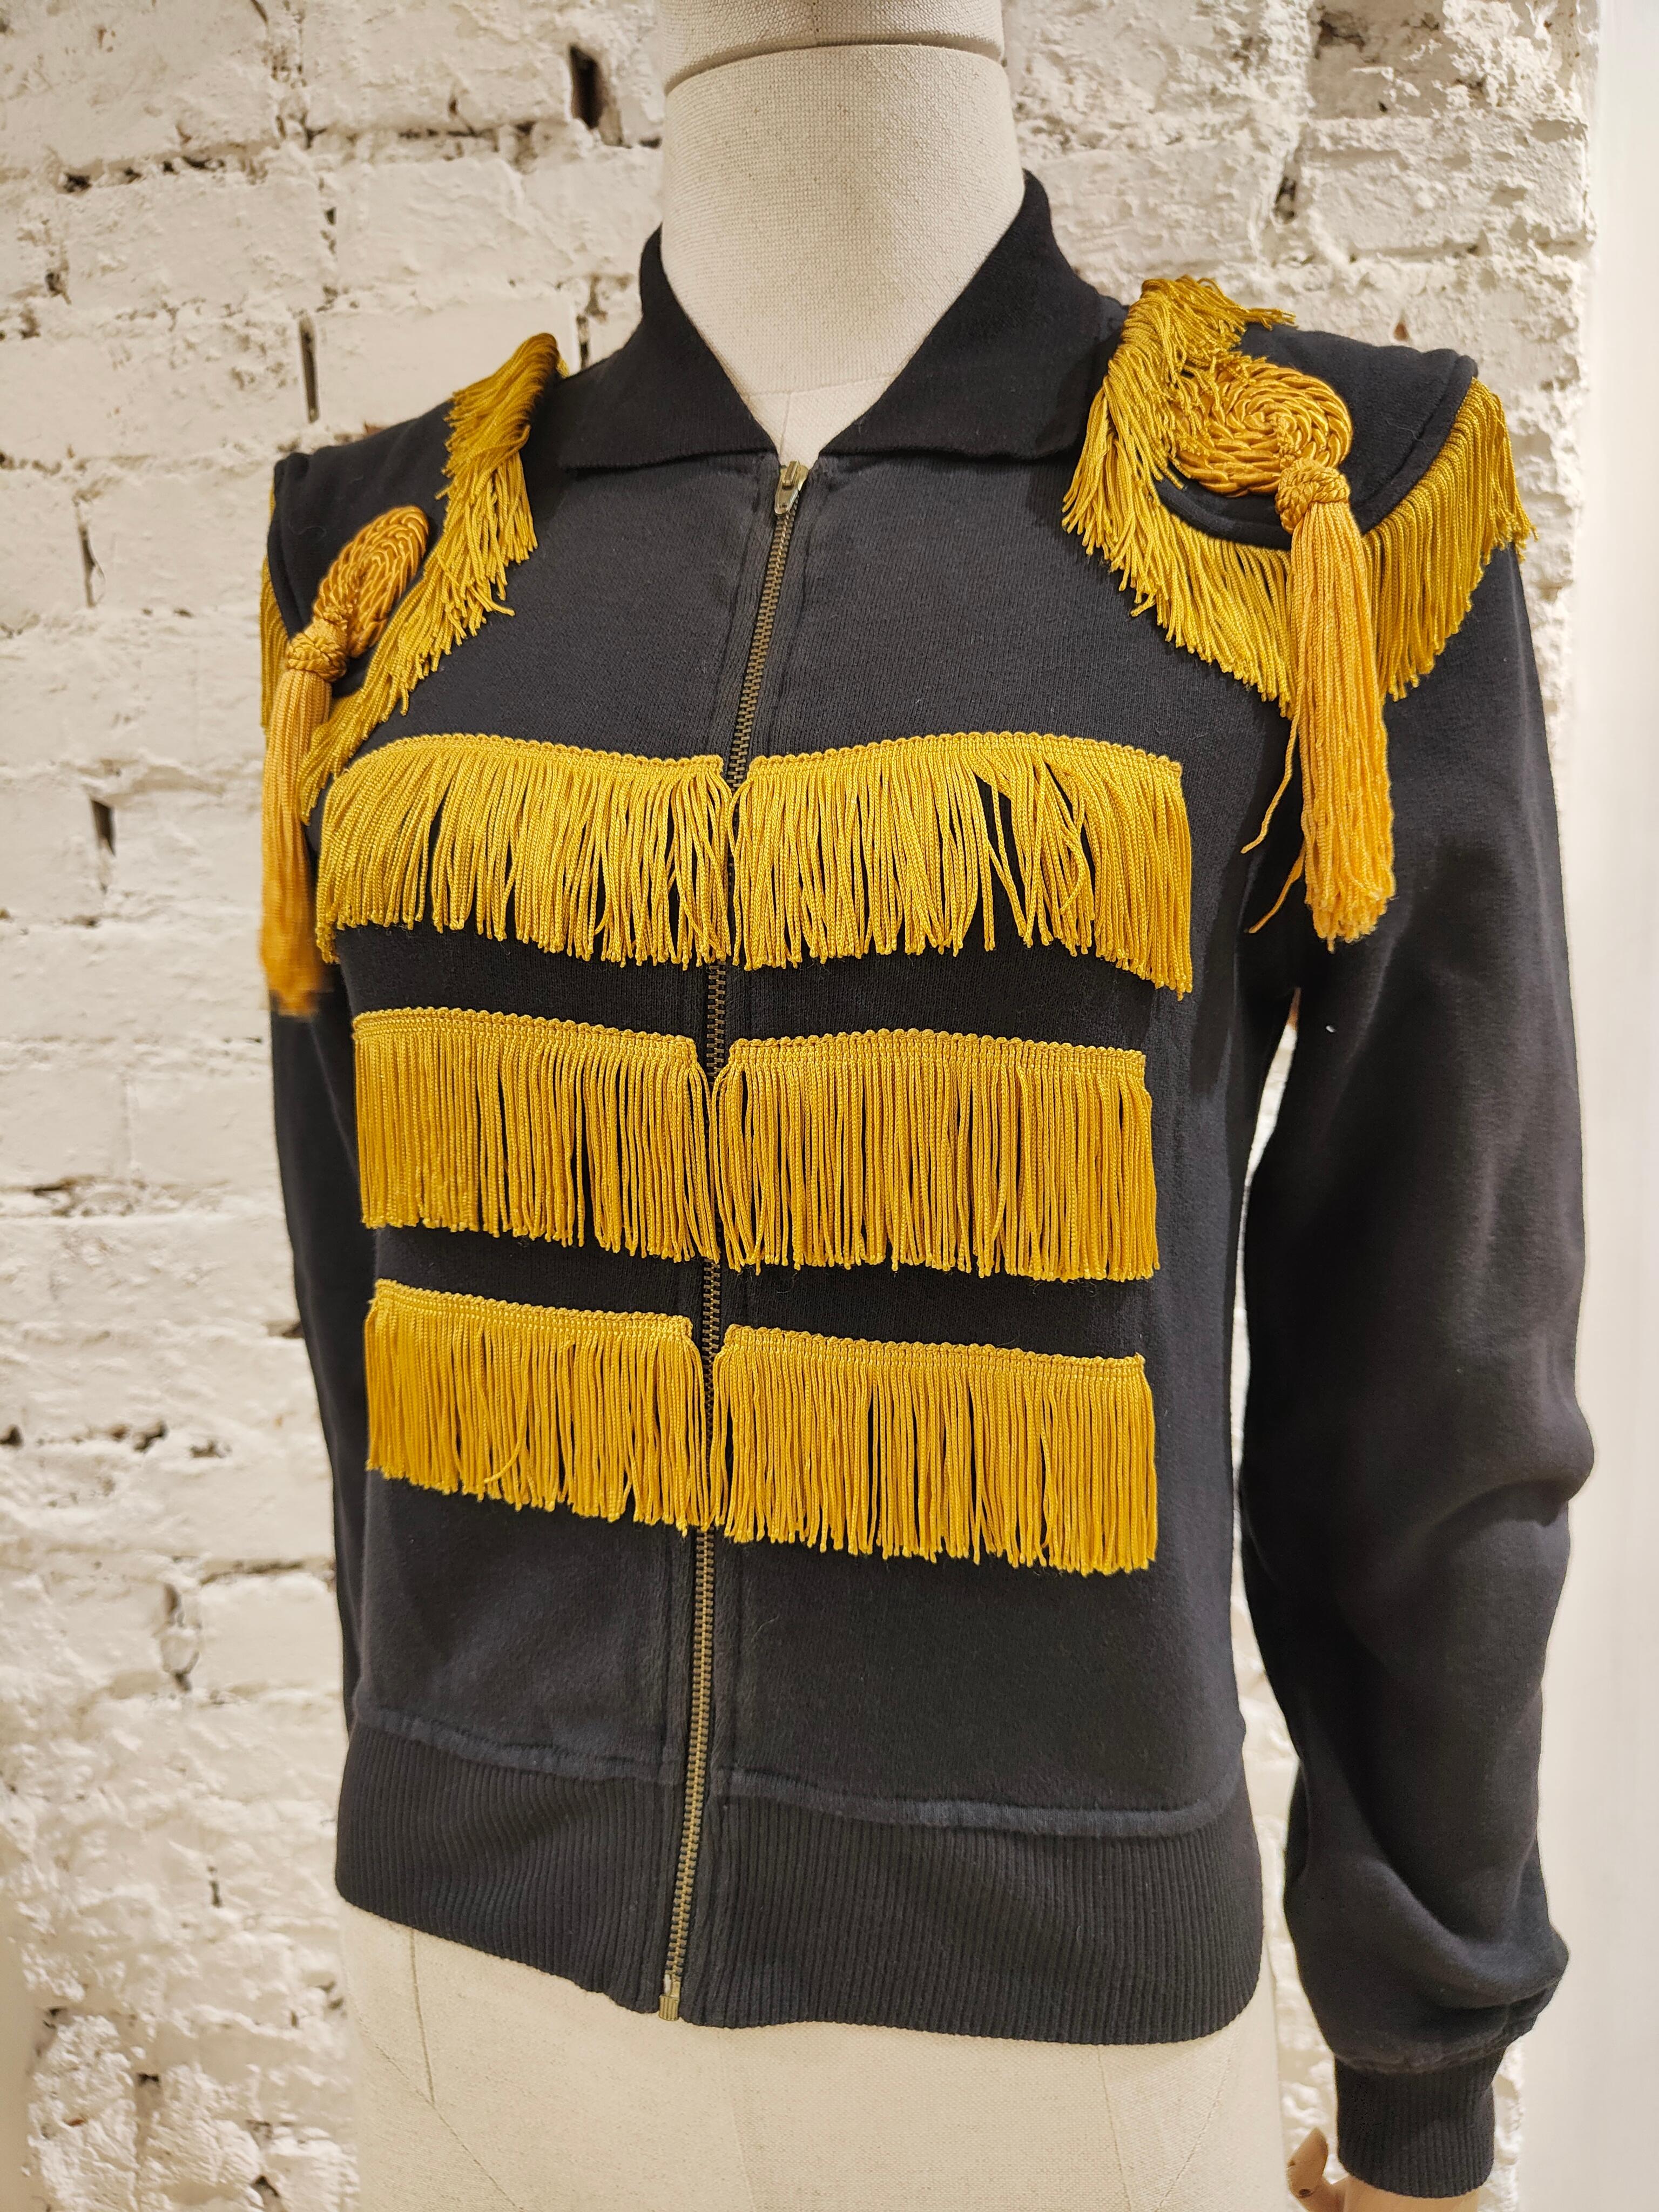 Moschino black gold fringes sweater  For Sale 3